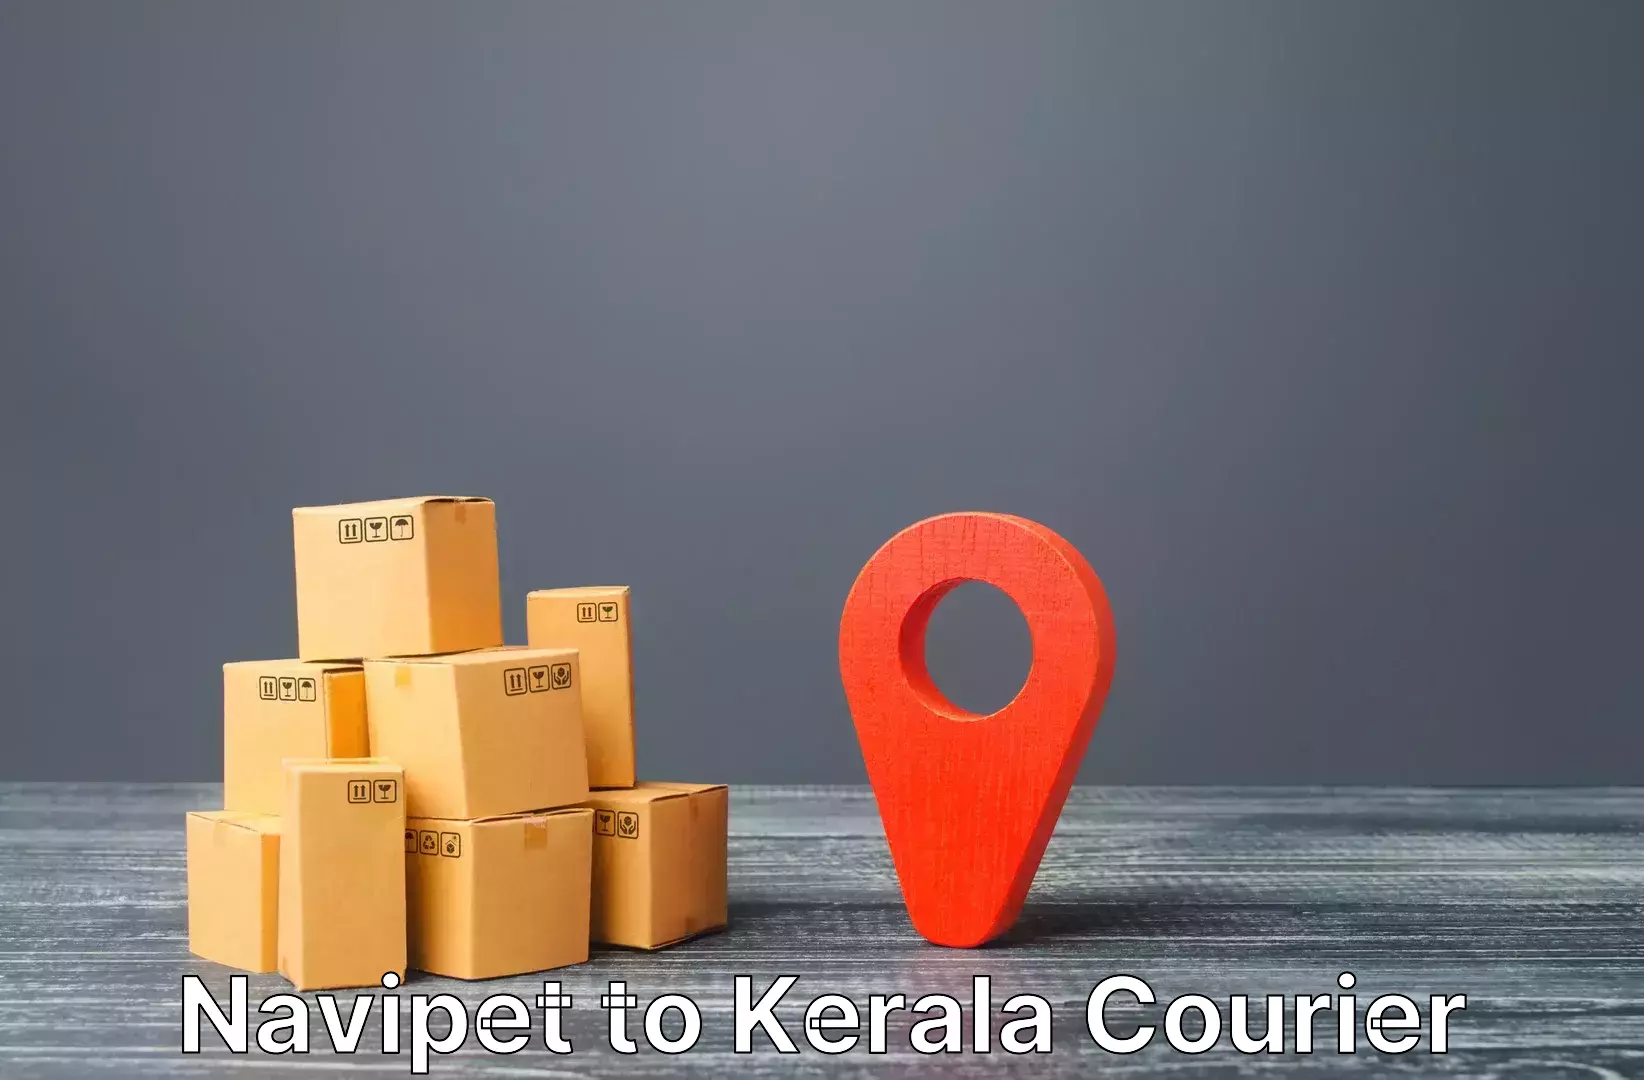 Baggage transport network Navipet to Mananthavady